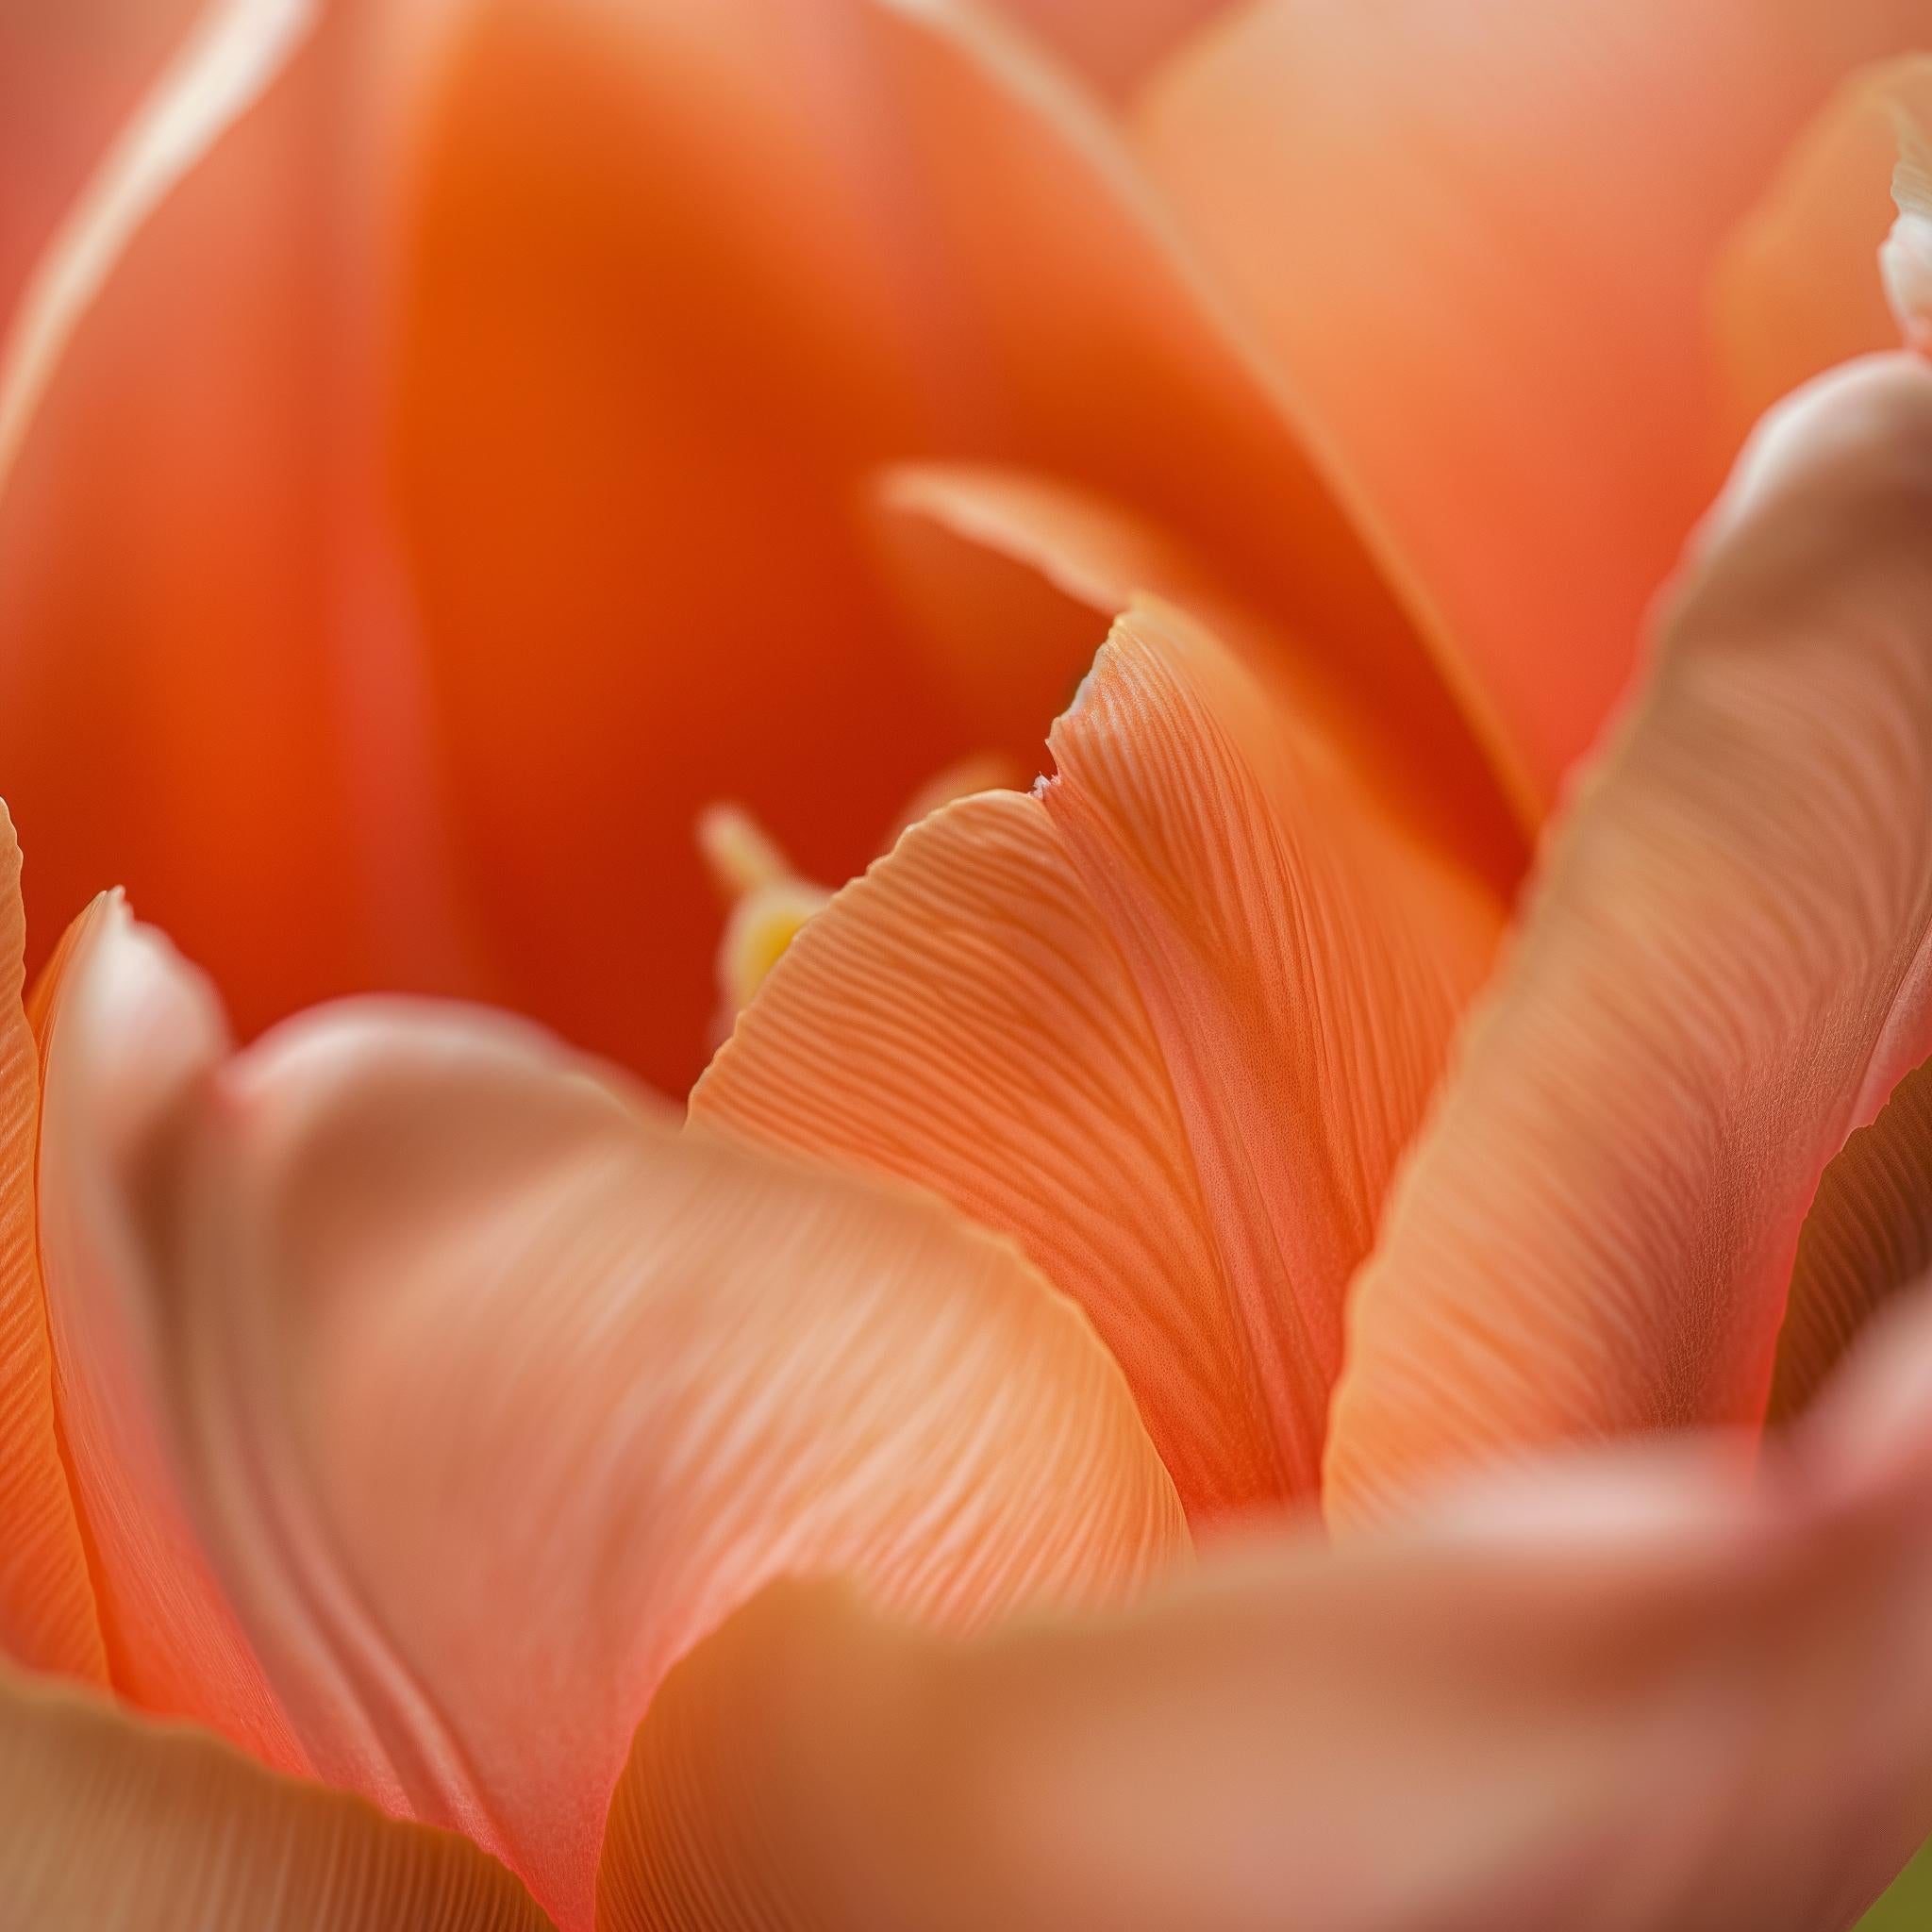 PEACH TULIP (After Georgia O'Keeffe) photograph on plexiglass  - Photograph by Max Grant